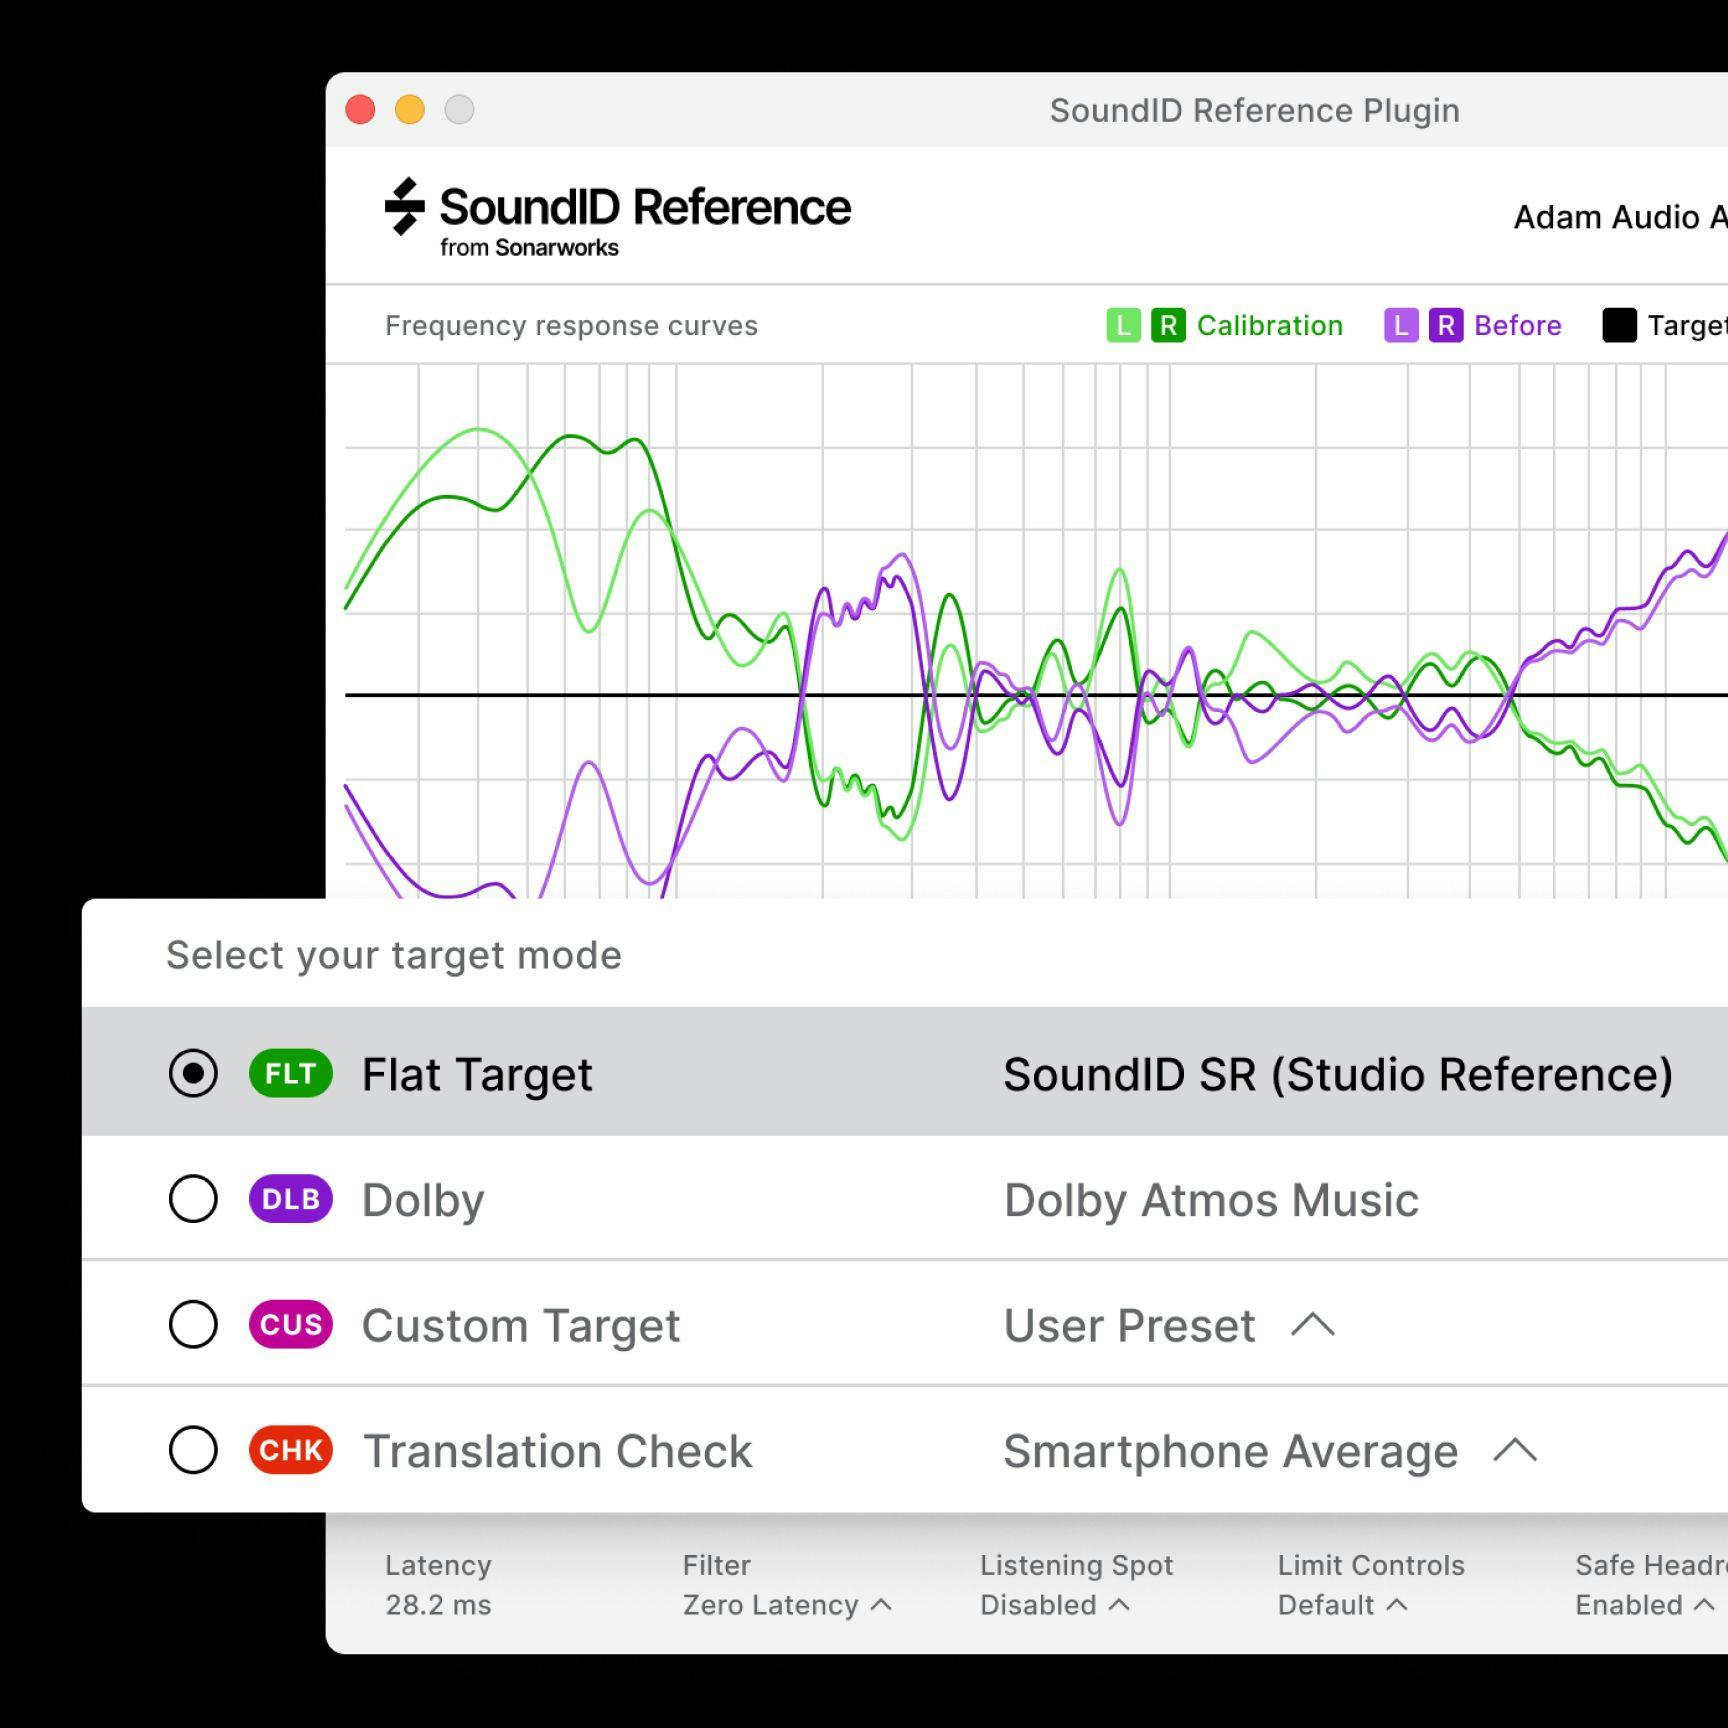 SoundID Reference Multichannel Target Modes